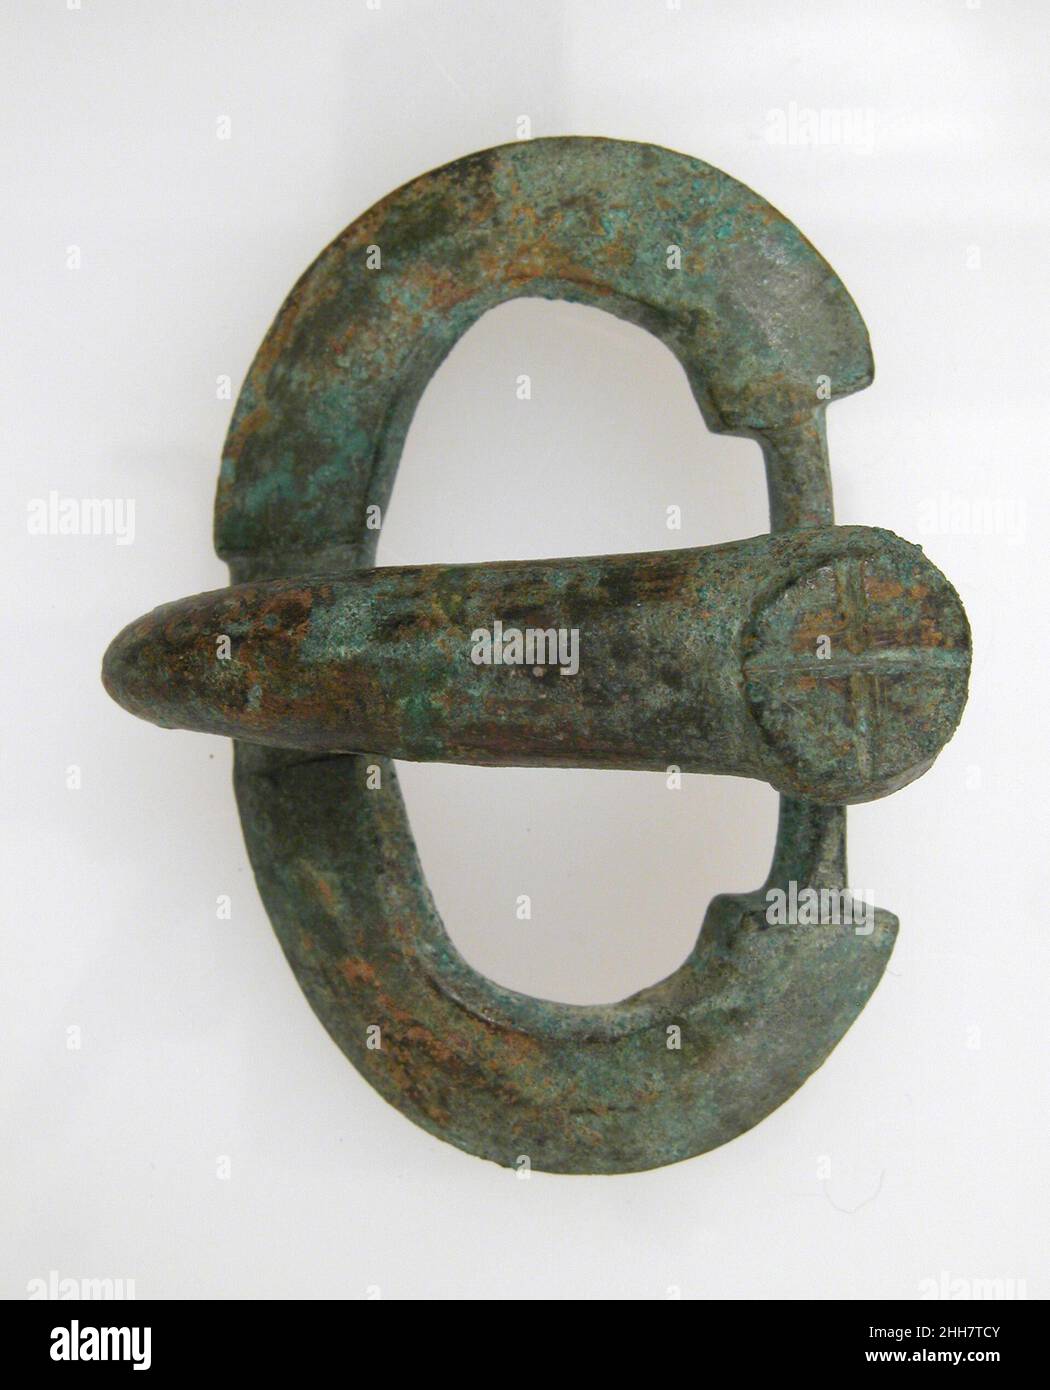 Belt Tongue and Oval Loop from a Buckle 7th Century Frankish. Belt Tongue and Oval Loop from a Buckle. Frankish. 7th Century. Copper alloy. Made in Northern France. Metalwork-Copper alloy Stock Photo